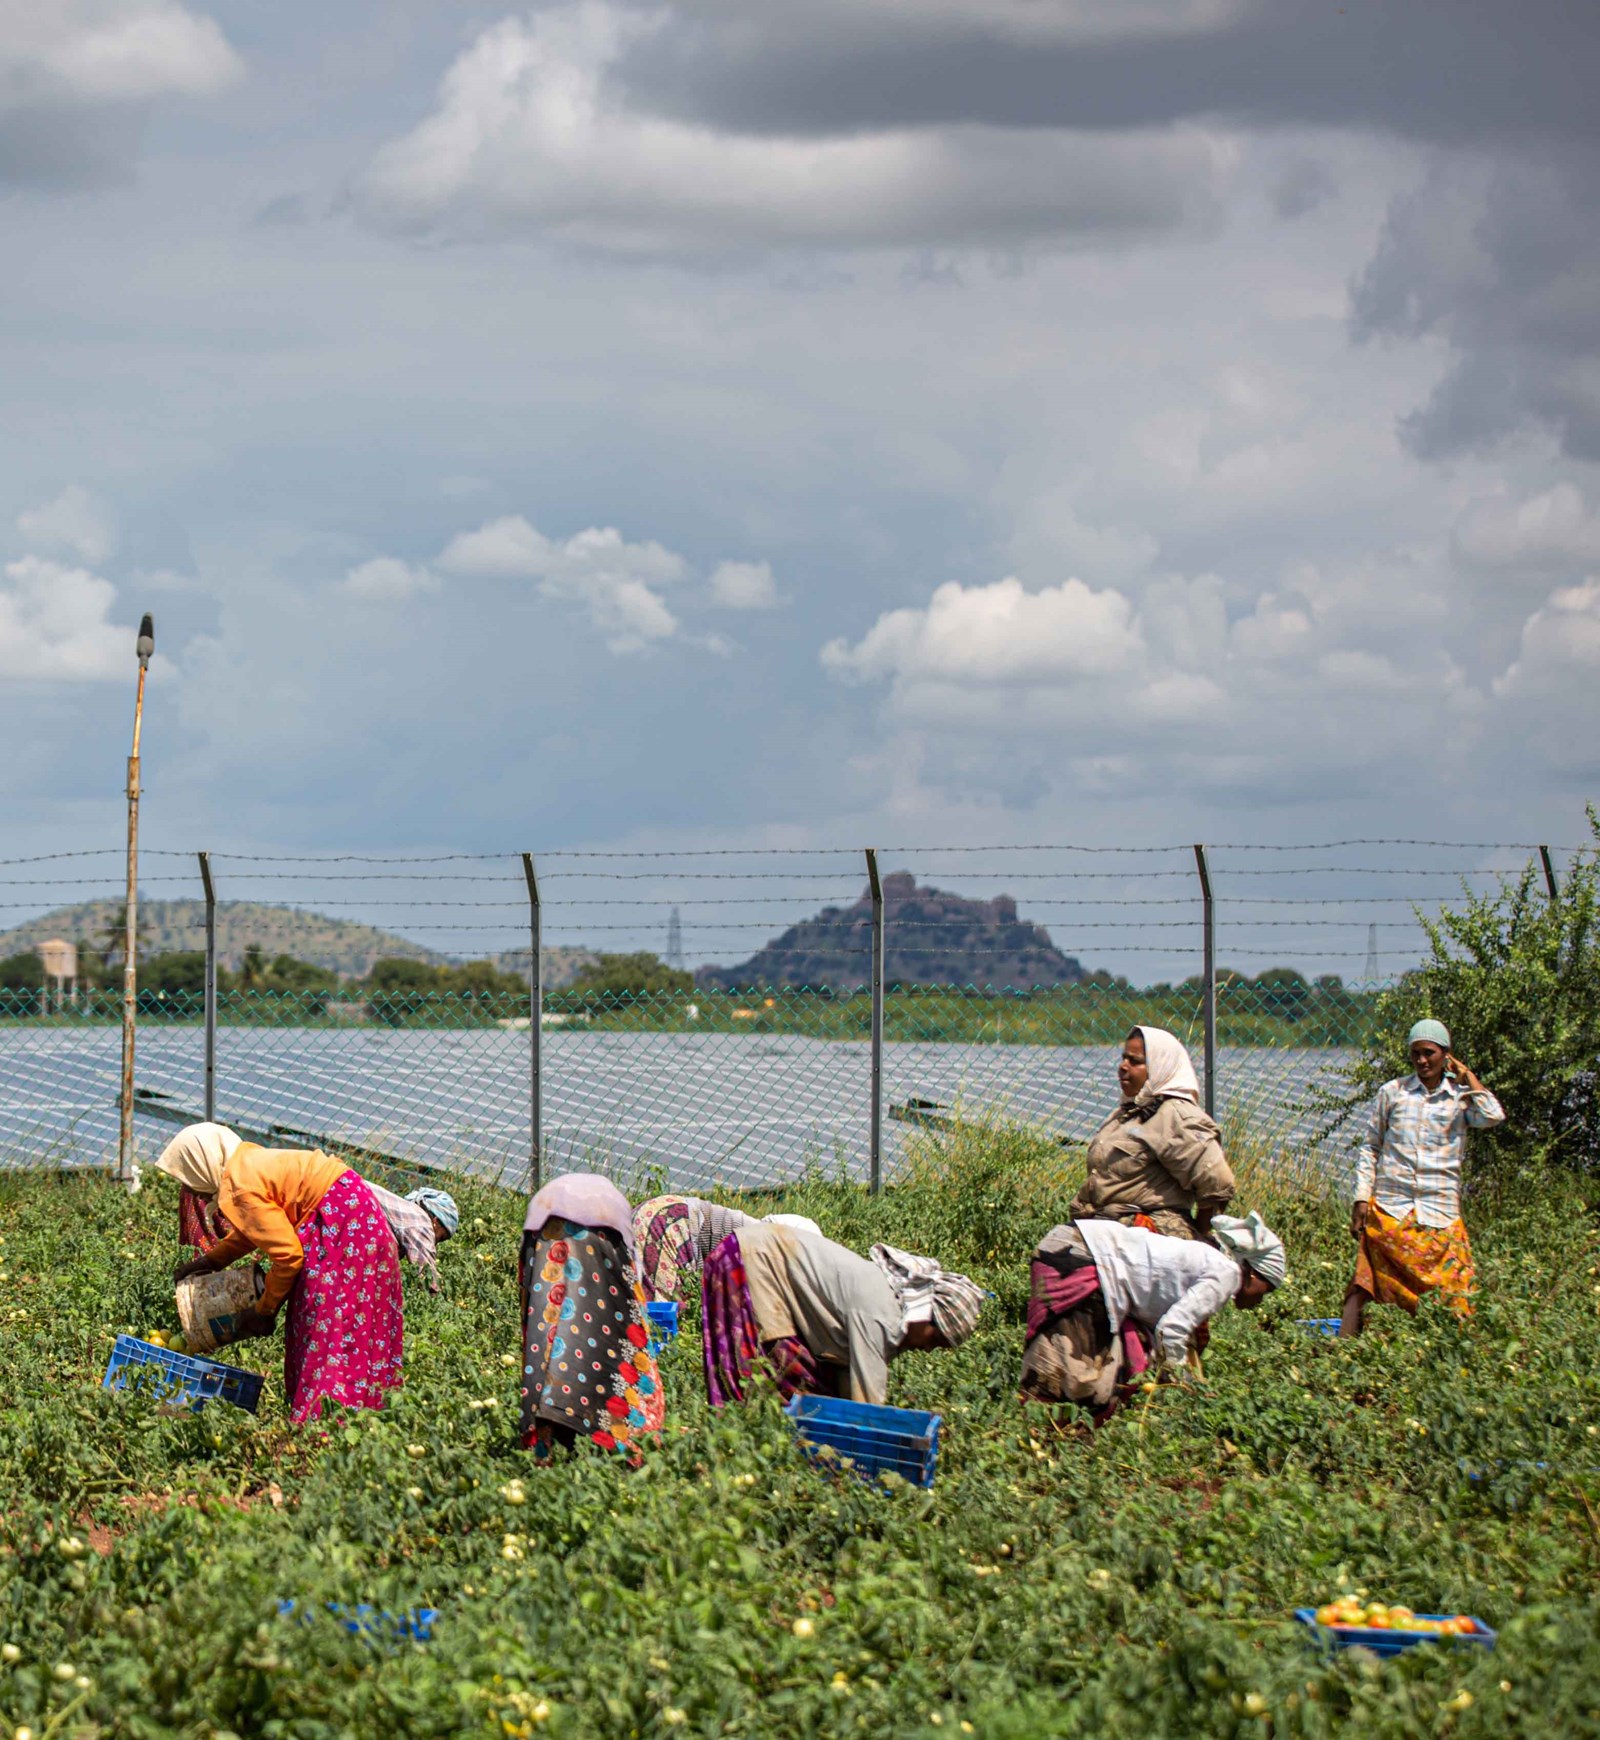 Women pick tomatoes near photovoltaic cell solar panels in the Pavagada Solar Park. In villages around the solar park where nearly 13,000 acres of land has been acquired on lease for 28 years to produce 2050MW of electricity, economic inequity is becoming apparent — while farmers with large land holdings have benefitted, poor farmers with no land have further been pushed to the margins with rising unemployment, lack of basic infrastructure, and a loss of their cultural identity. 